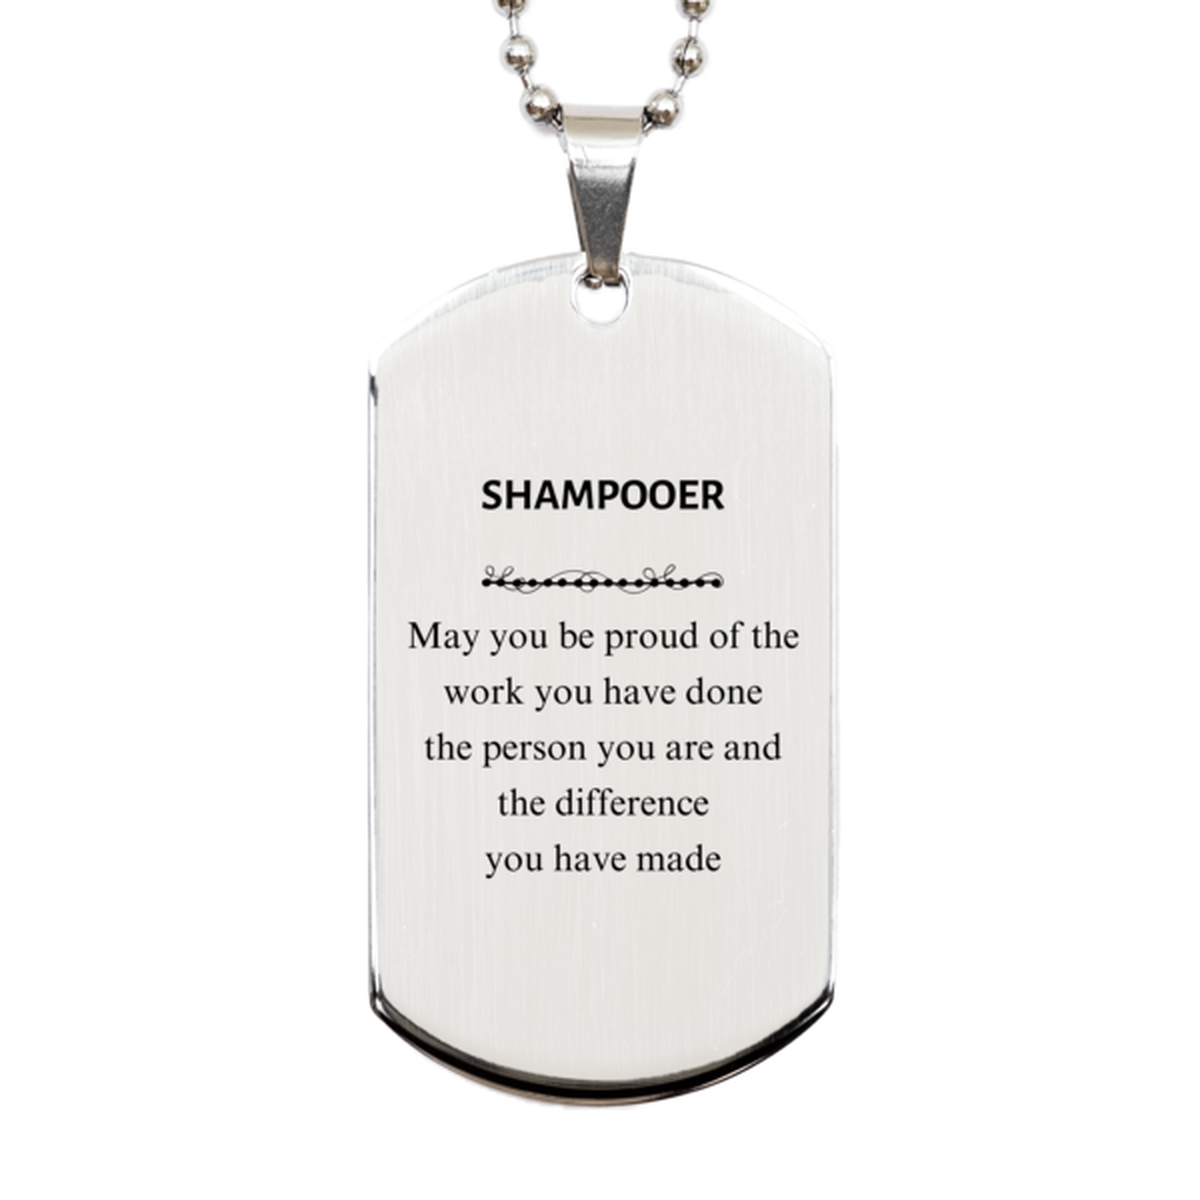 Shampooer May you be proud of the work you have done, Retirement Shampooer Silver Dog Tag for Colleague Appreciation Gifts Amazing for Shampooer